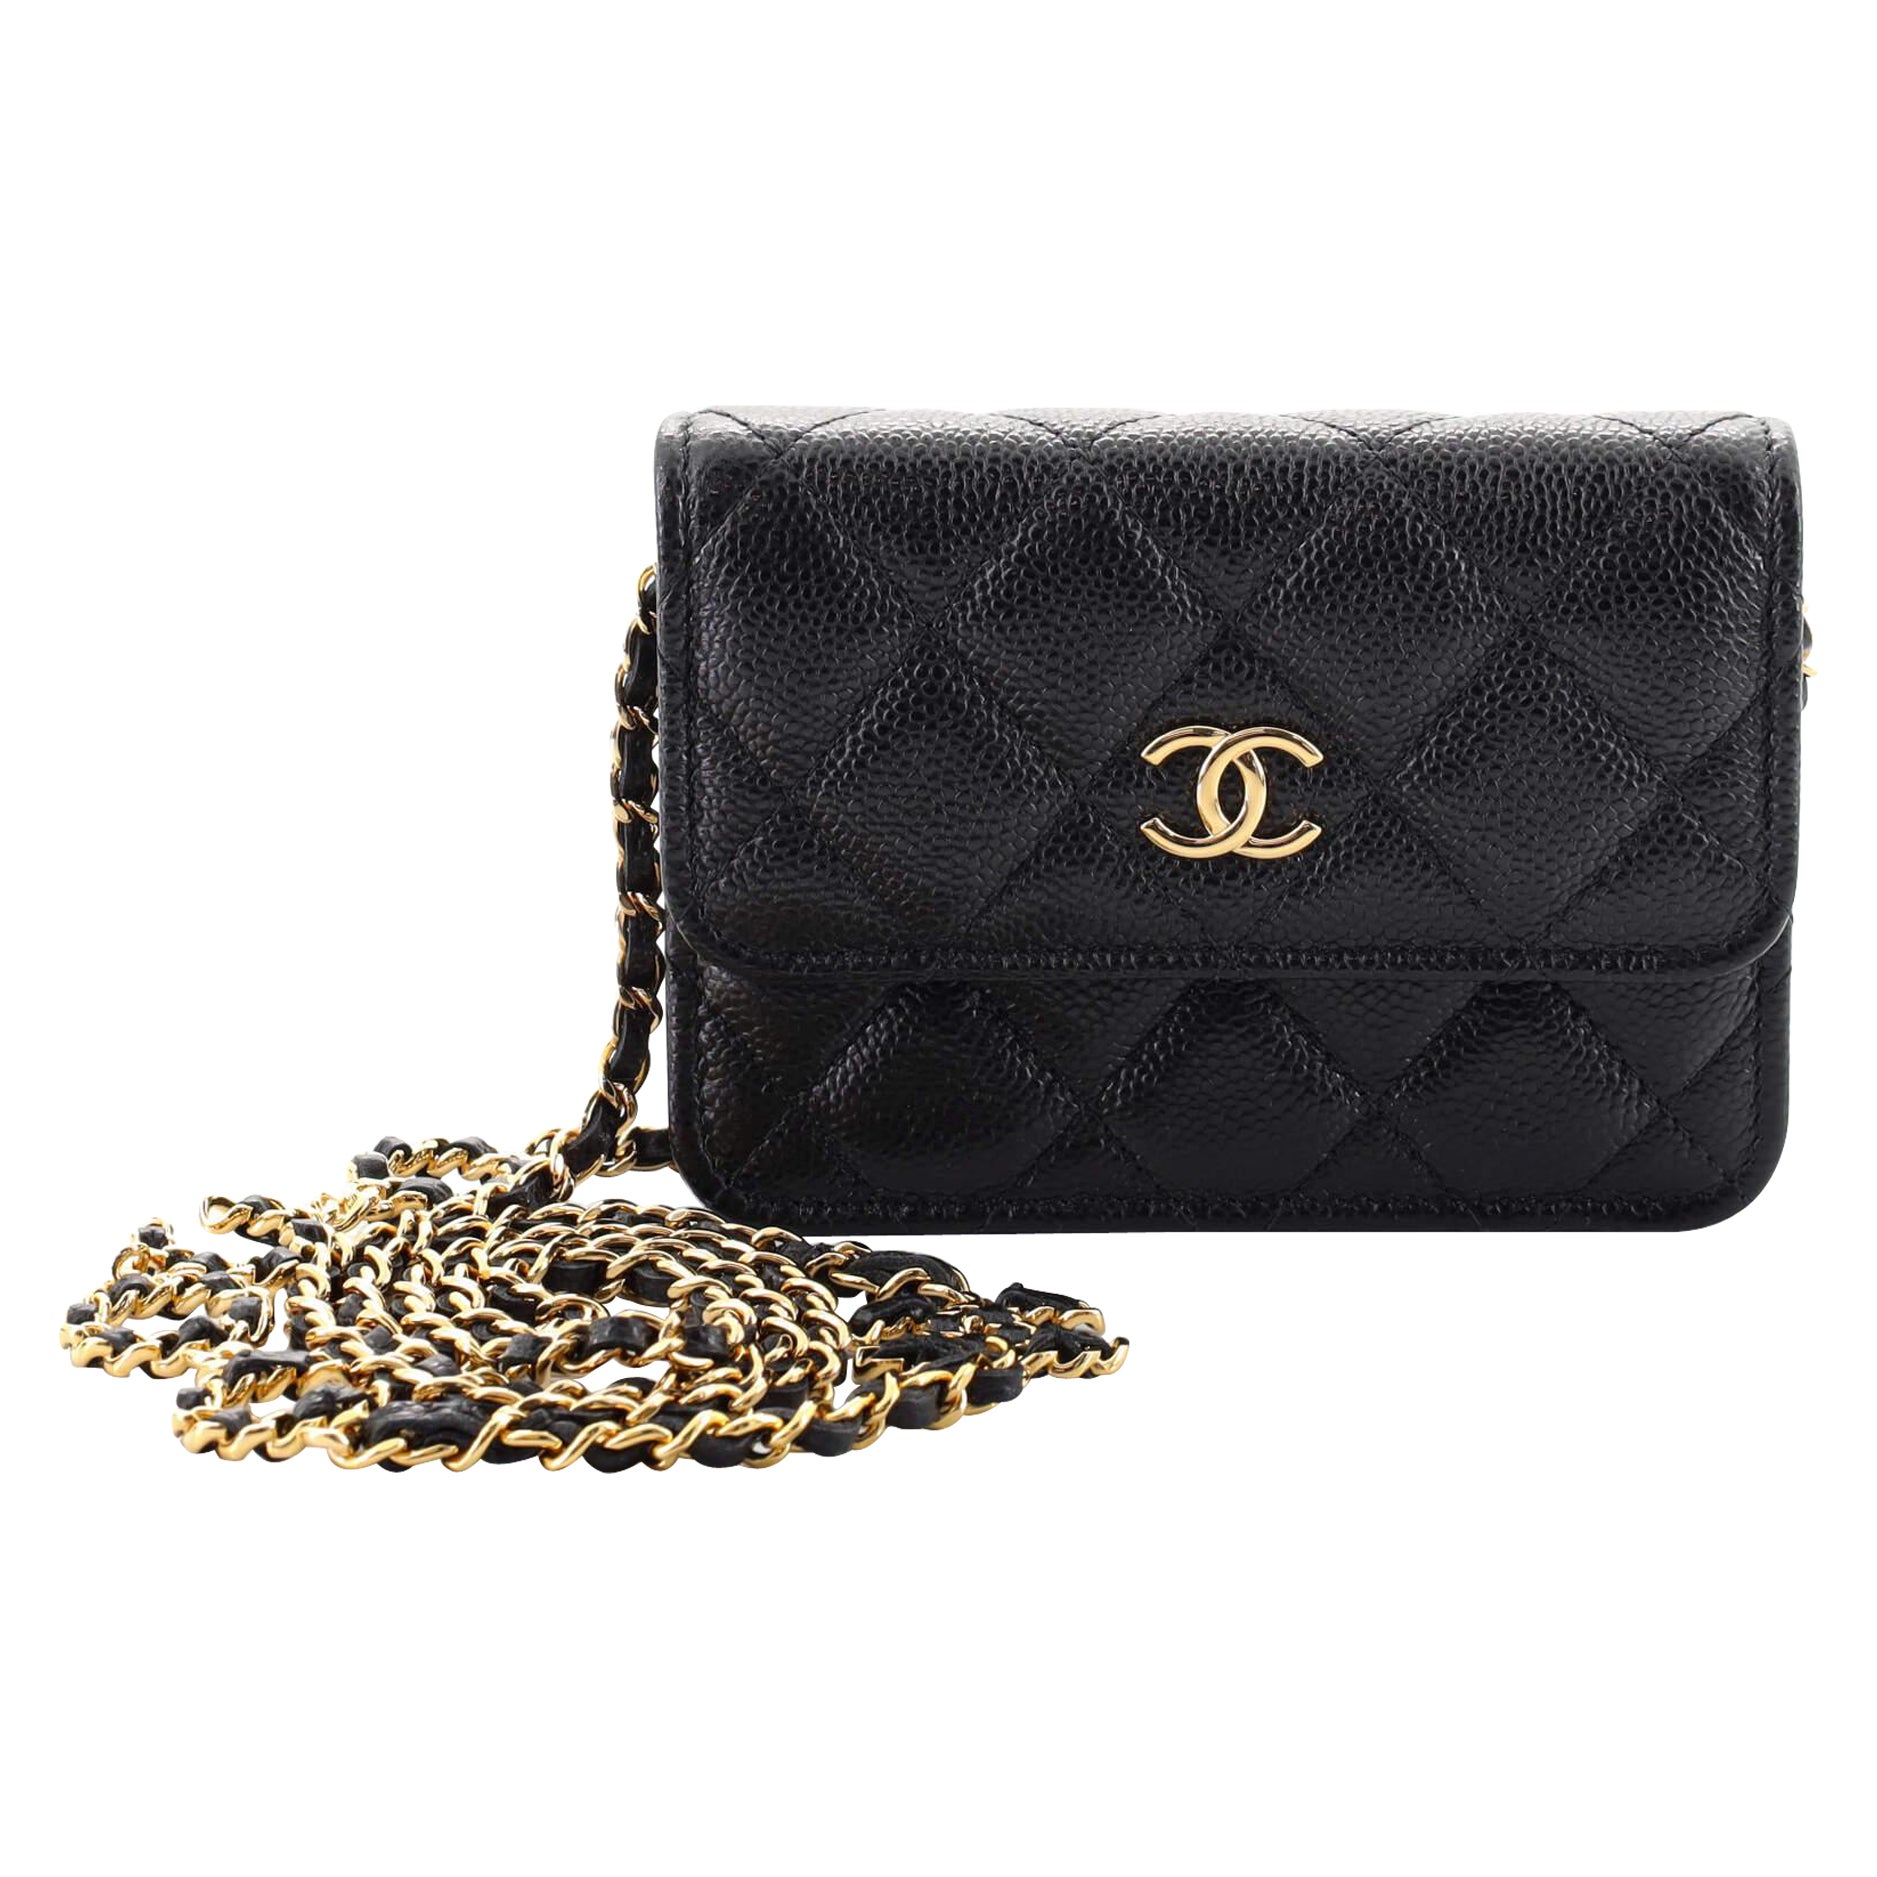  Bag Organizer liner For chanel coco handle small bag